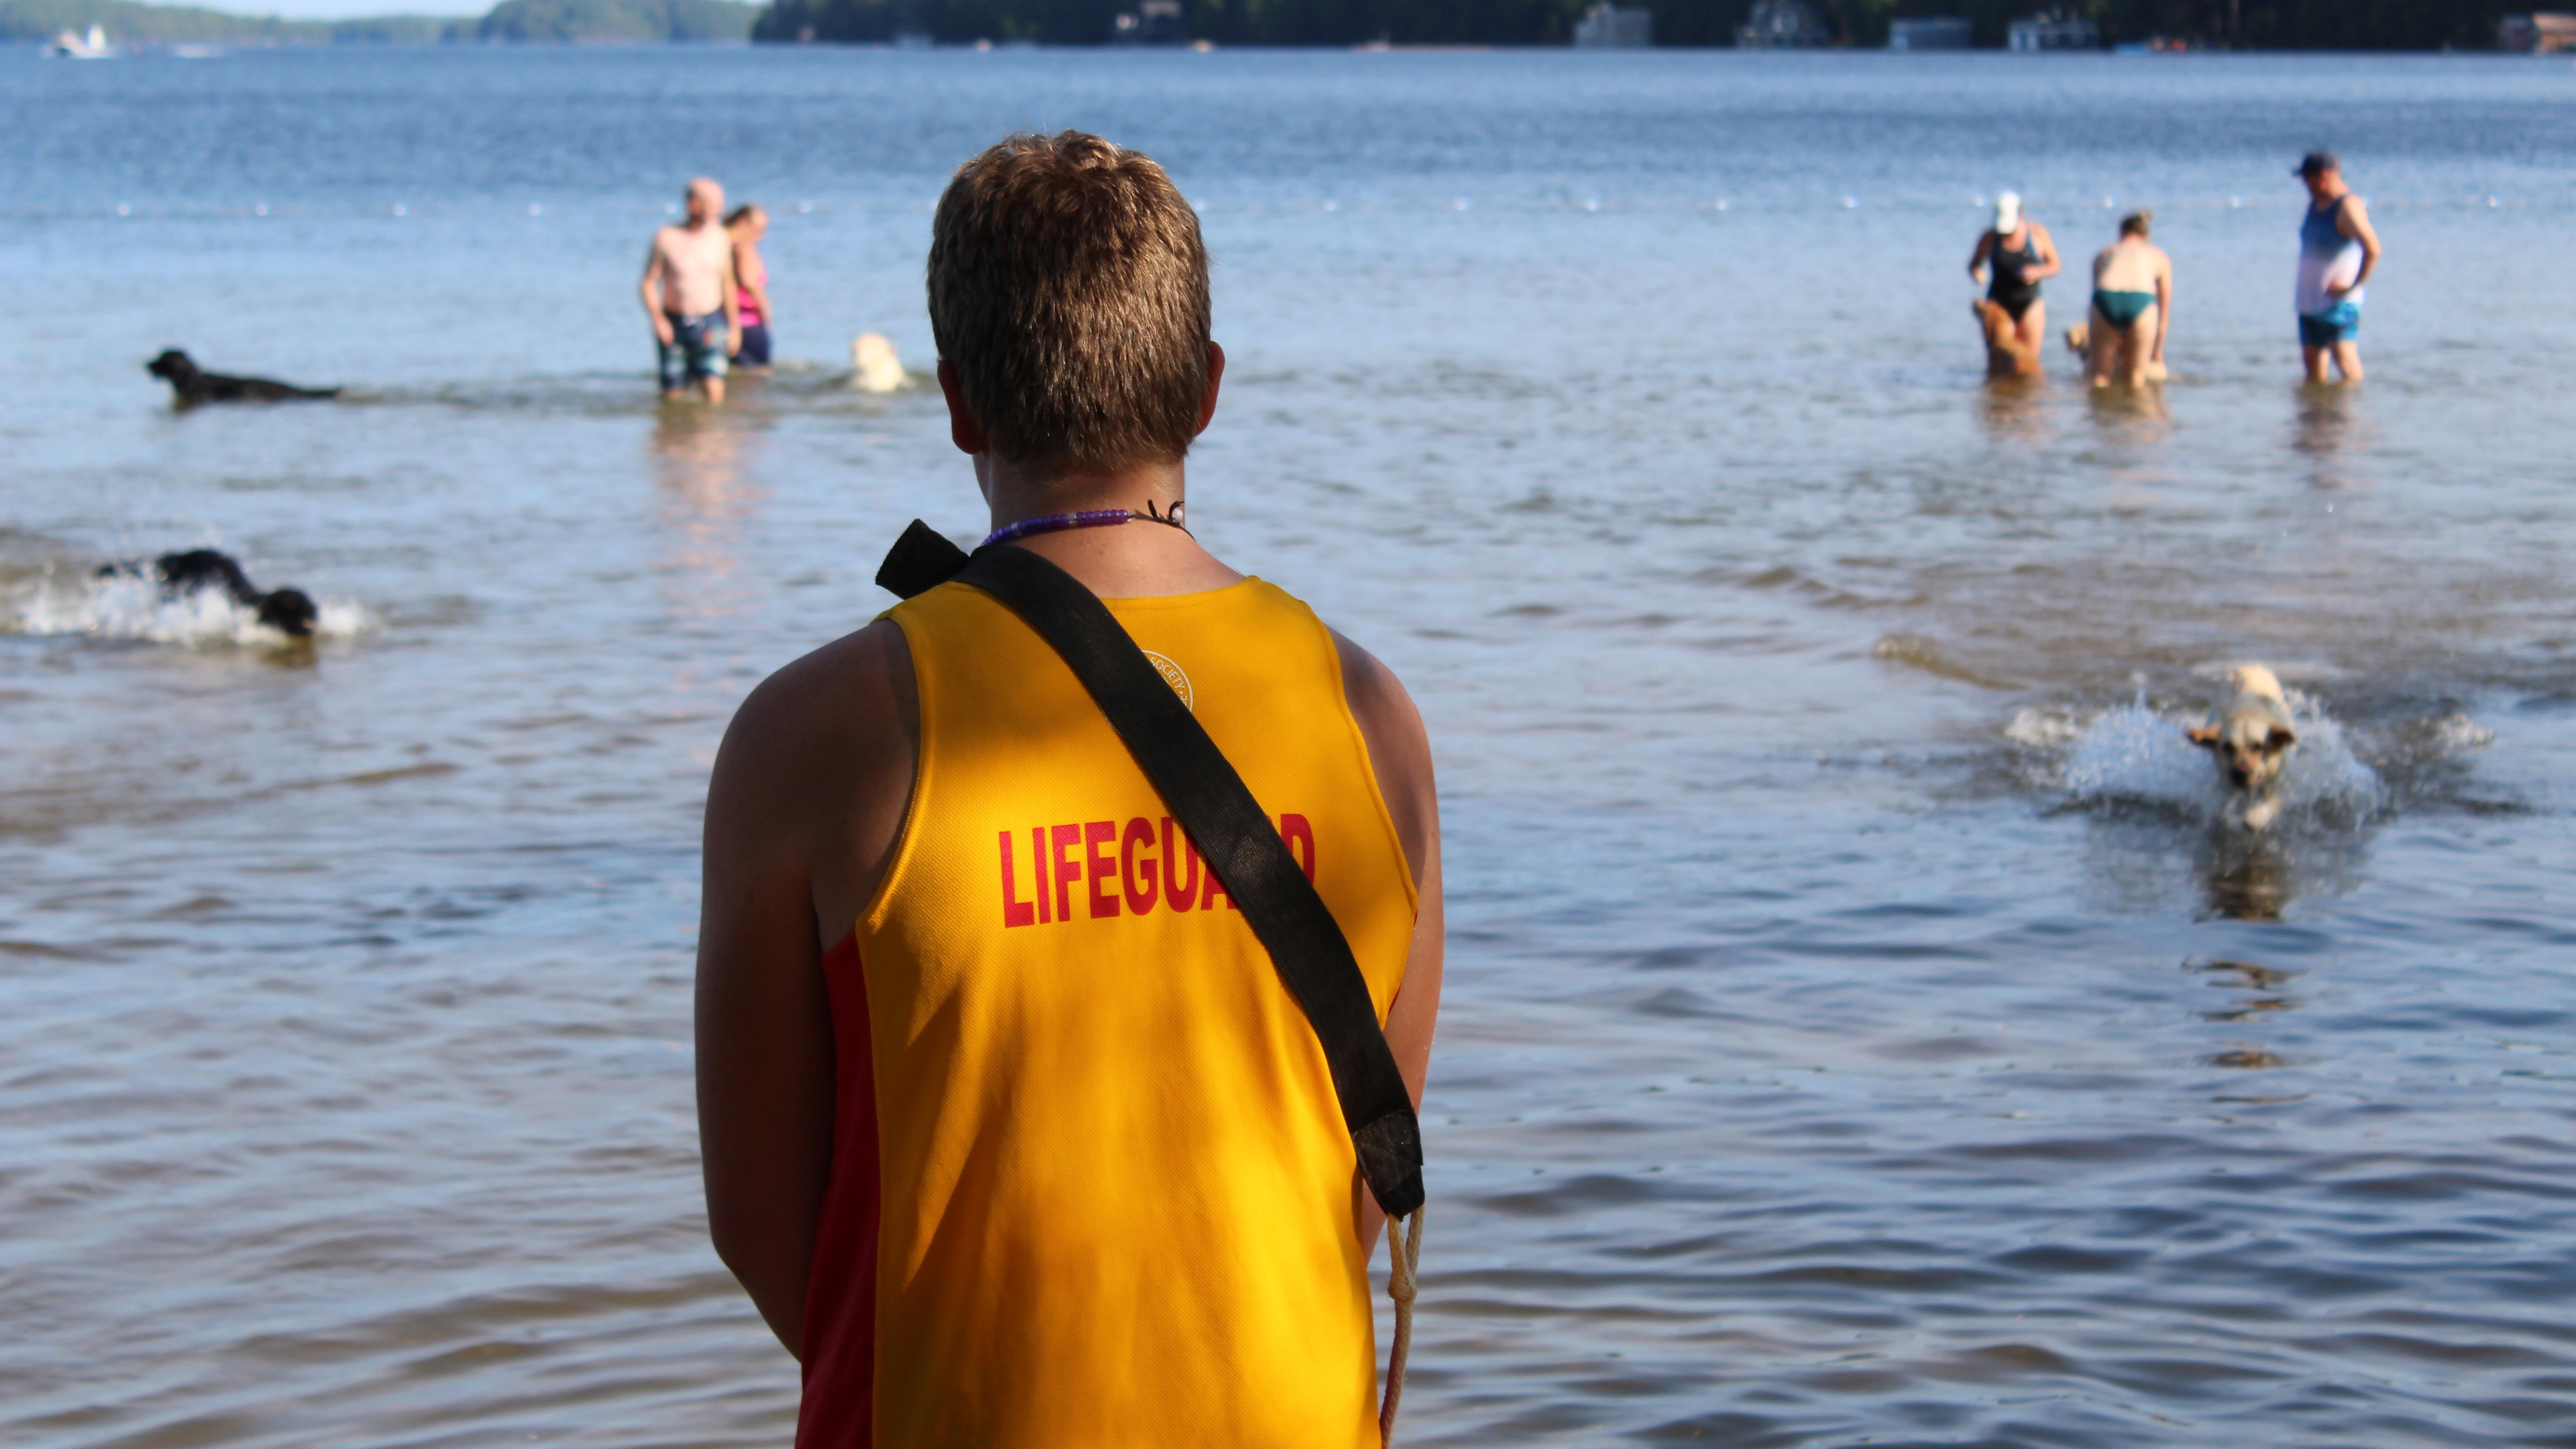 A lifeguard watching the lake while kids are playing